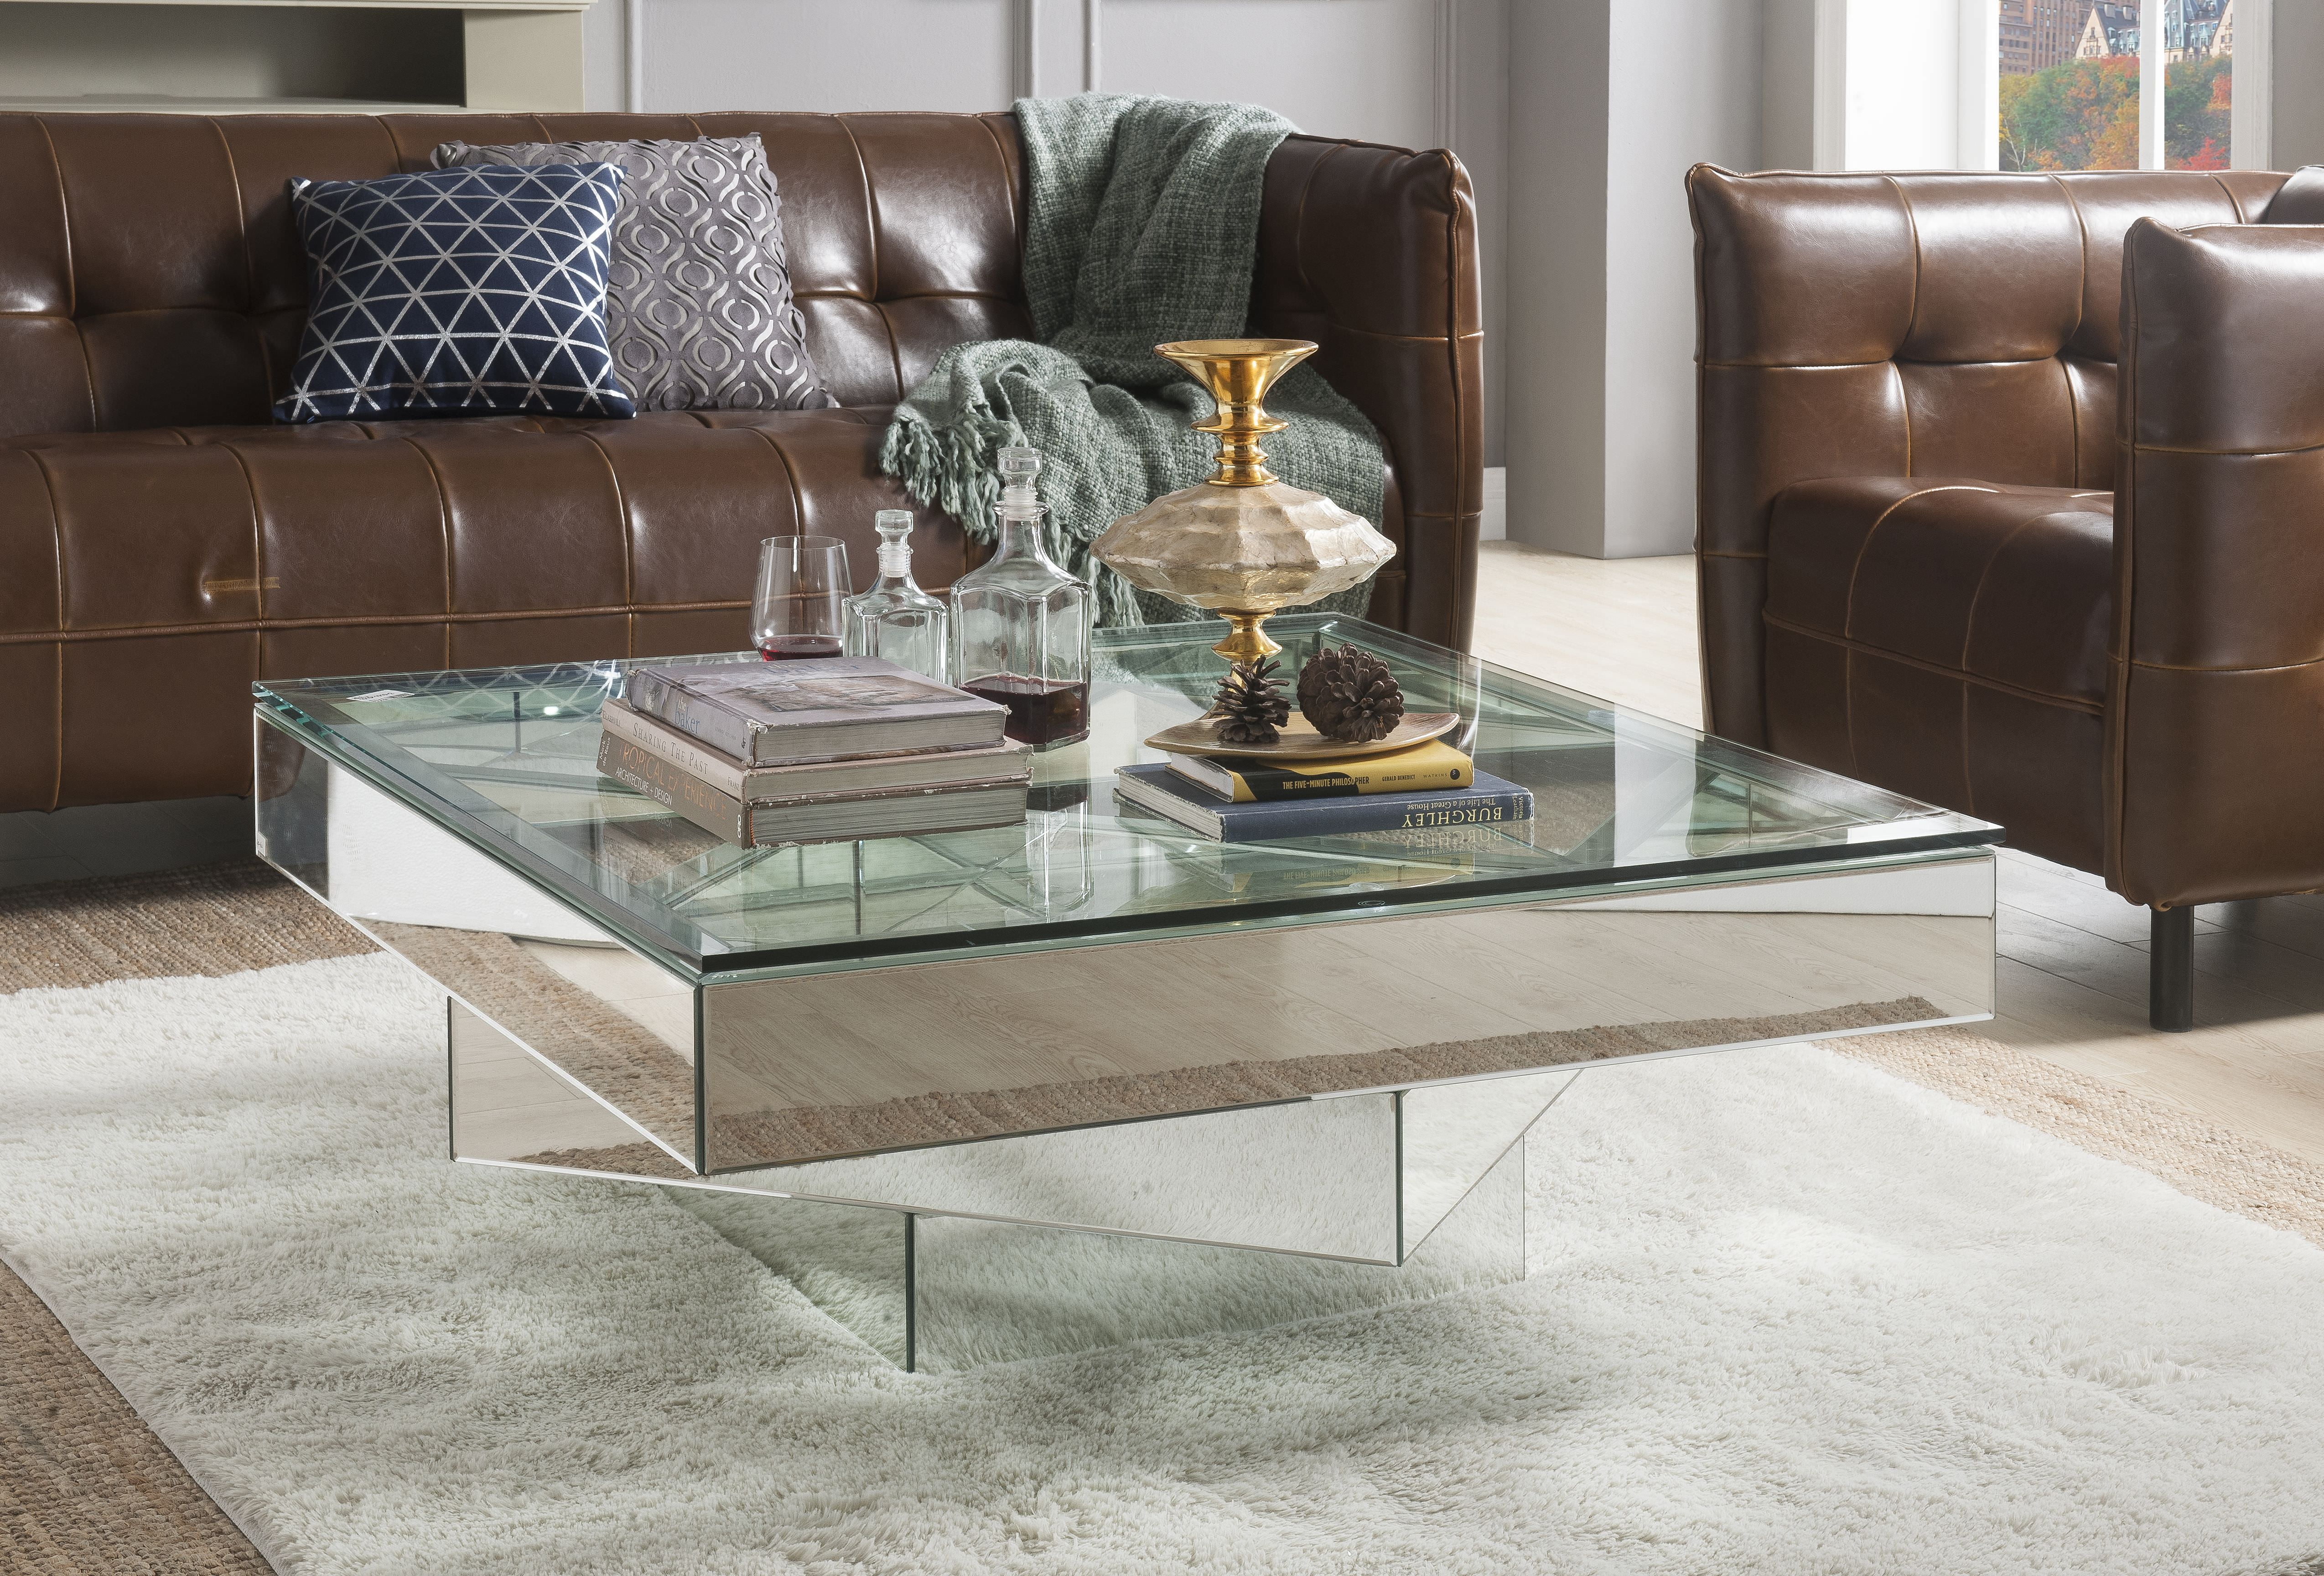 Acme Meria Square Glass Coffee Table, Large Mirrored Glass Coffee Table